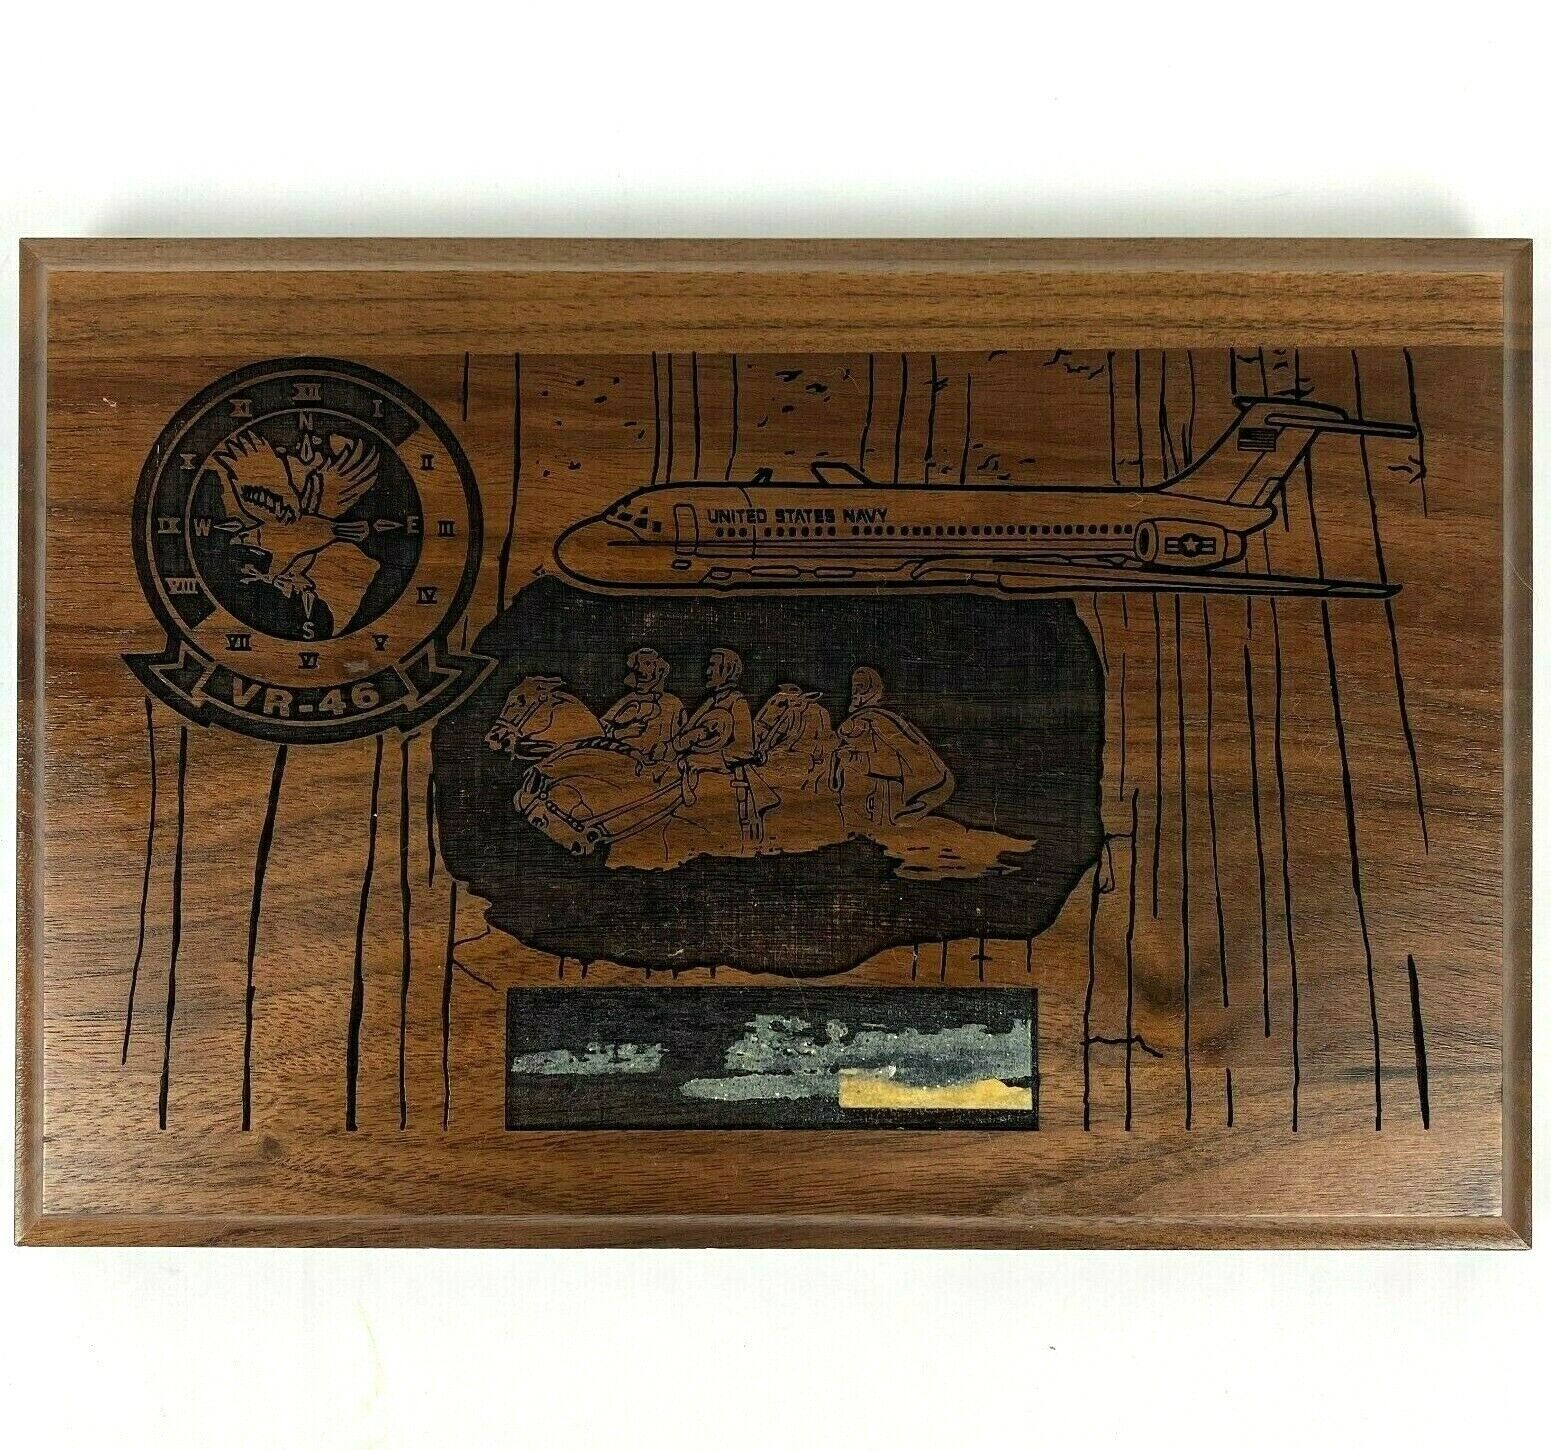 VR-46 Squadron Wooden Plaque Military US Navy Aircraft DC-9 Jet  Engraved US